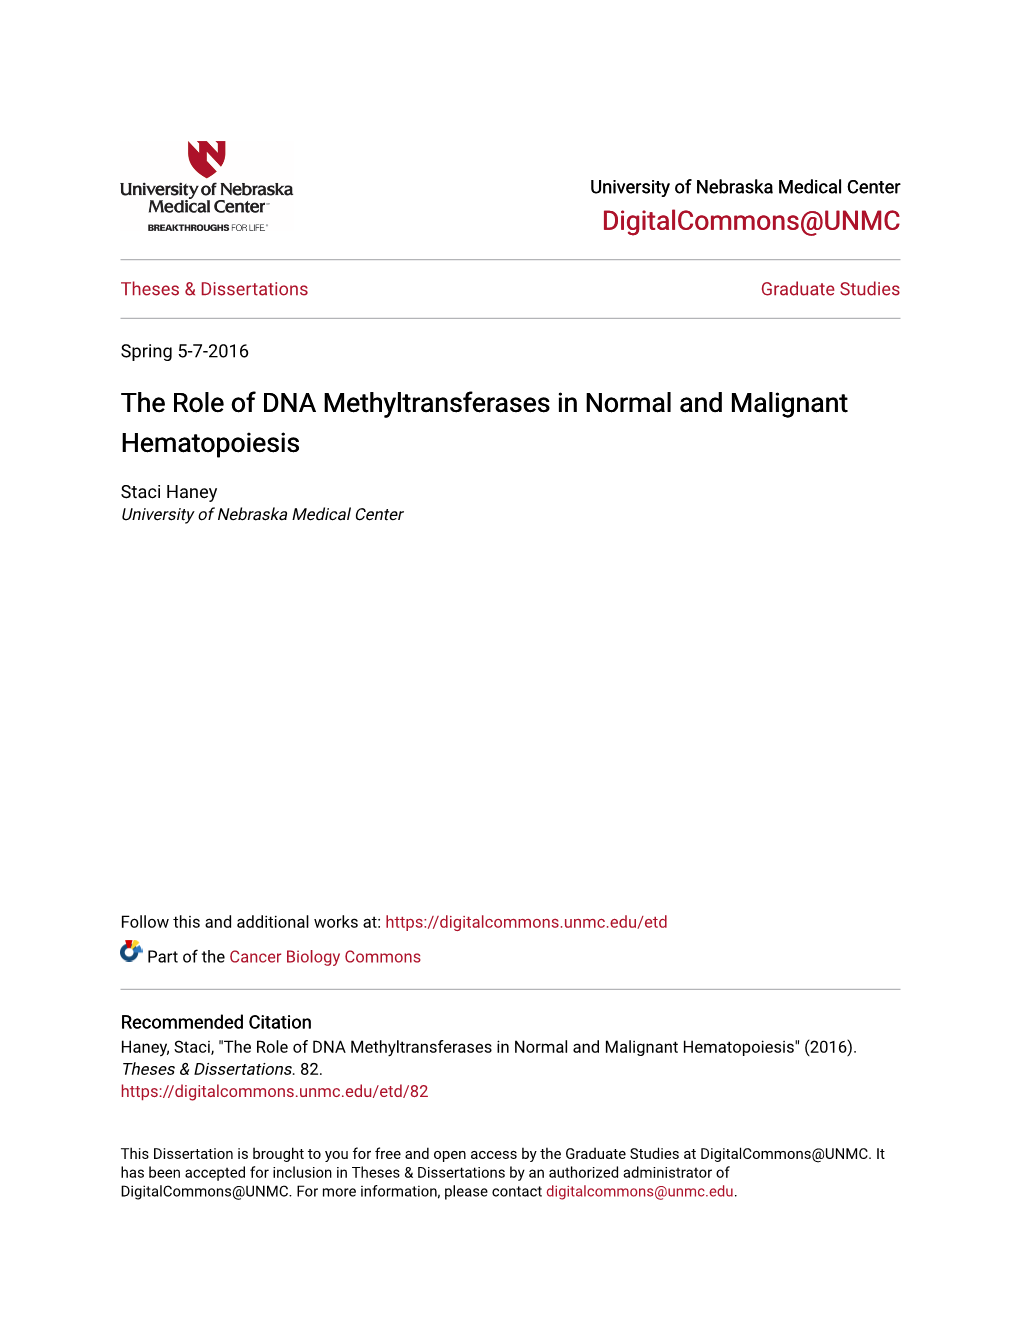 The Role of DNA Methyltransferases in Normal and Malignant Hematopoiesis